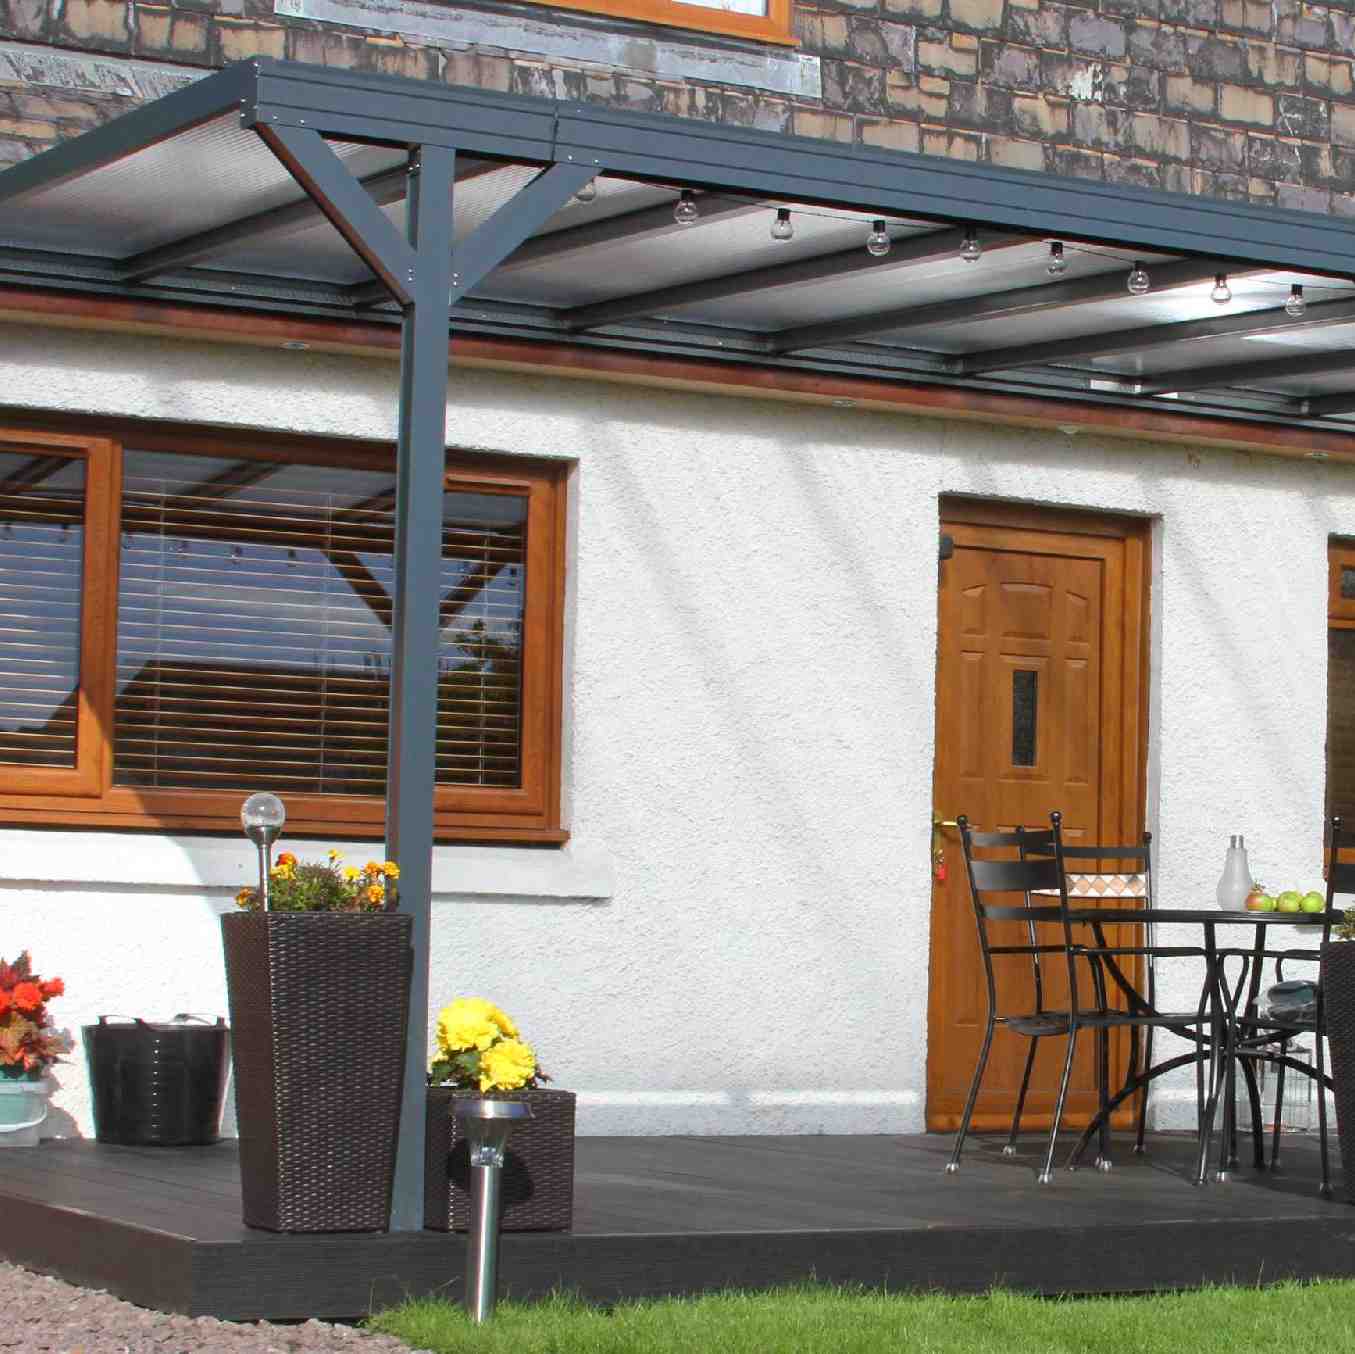 Omega Verandah, Anthracite Grey, 6mm Glass Clear Plate Polycarbonate Glazing - 7.7m (W) x 2.0m (P), (4) Supporting Posts